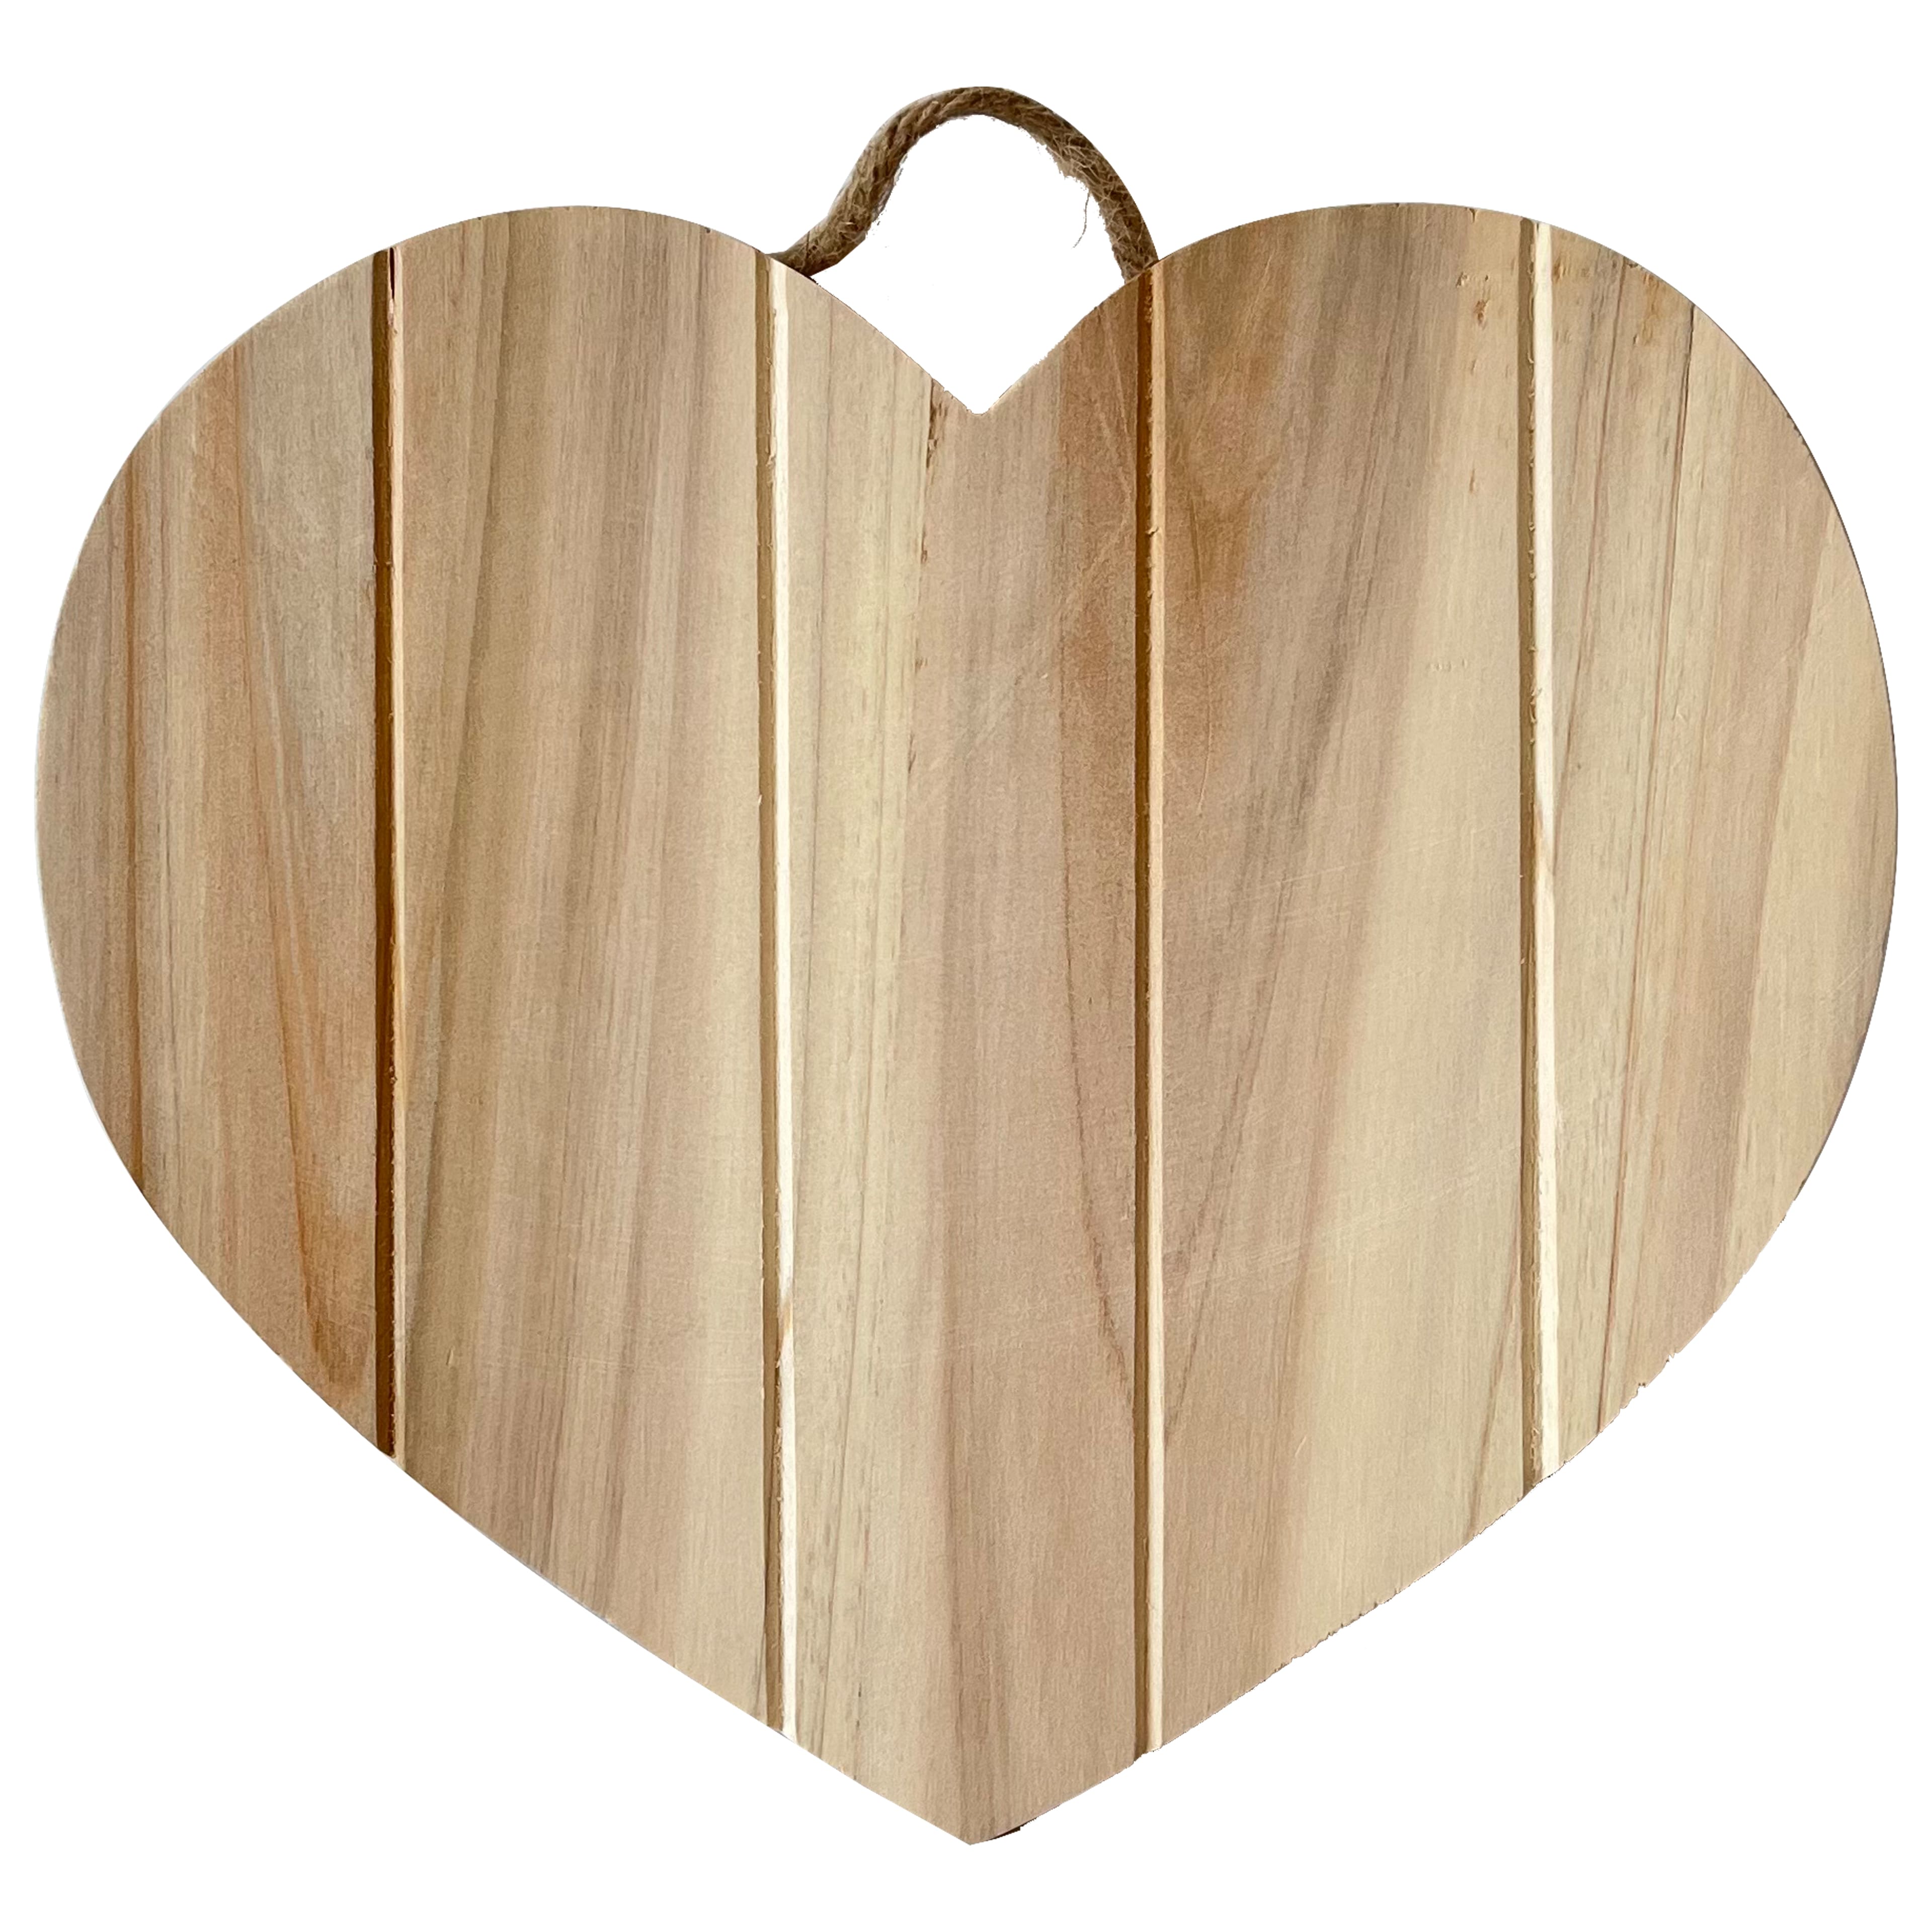 11 Wood Pallet Heart Plaque by Make Market®